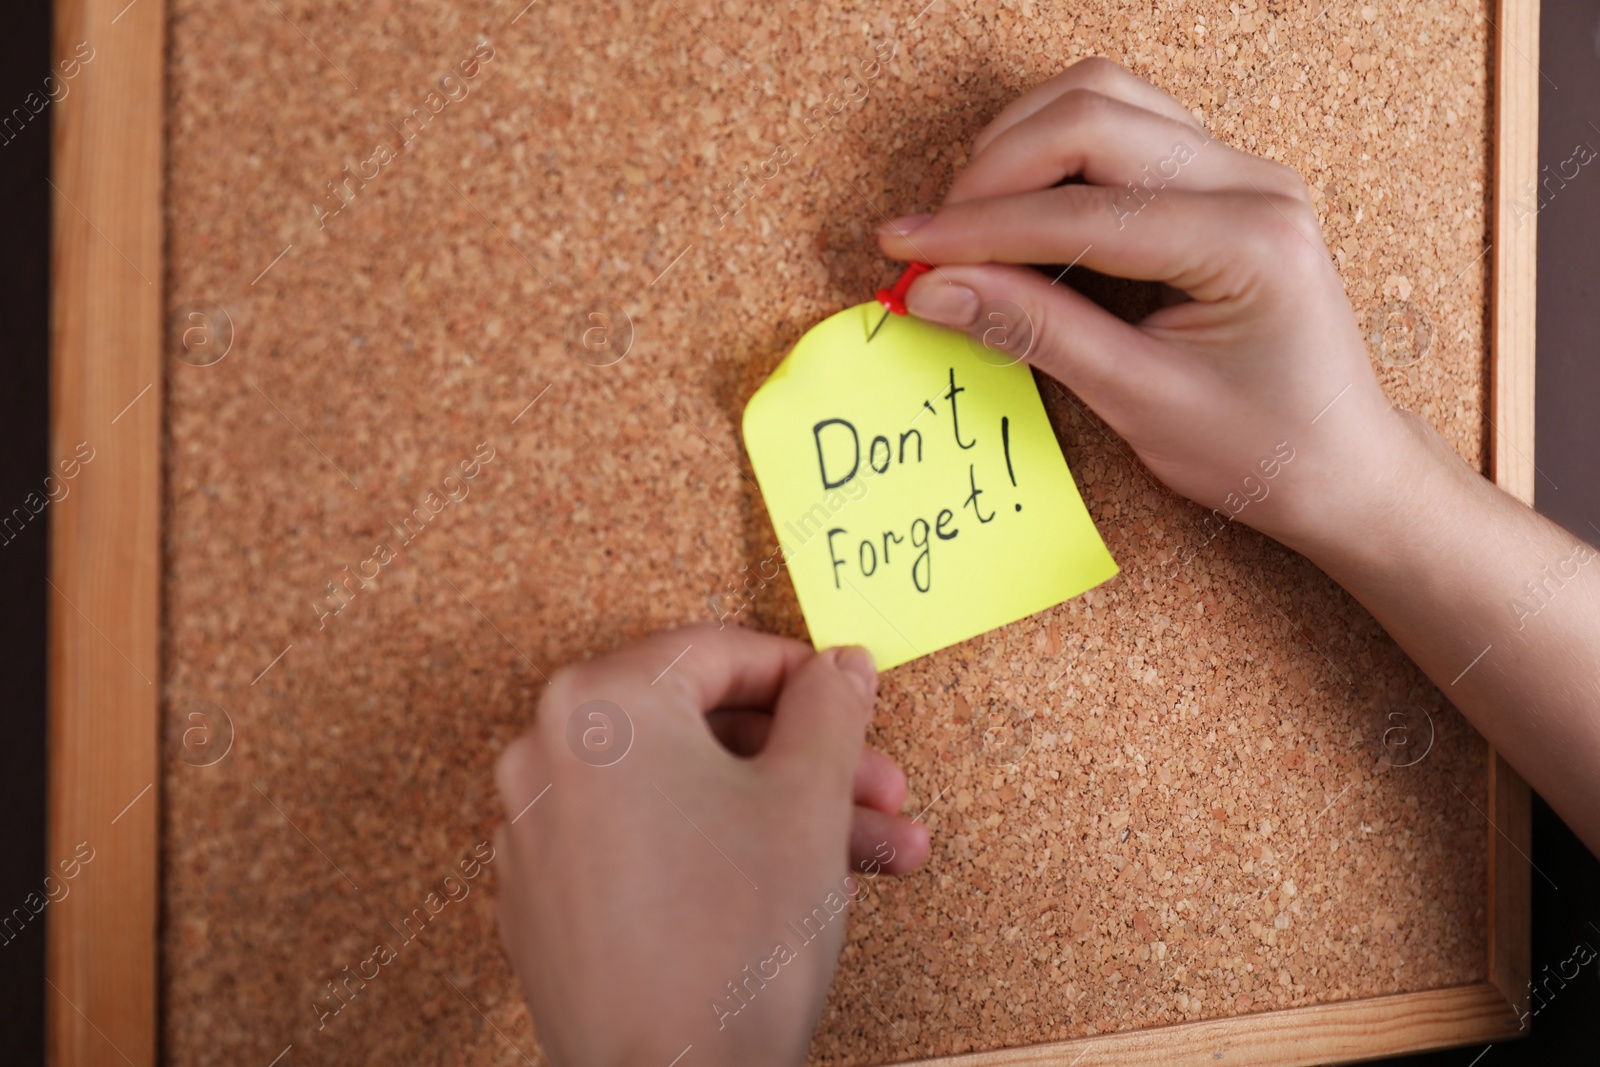 Photo of Woman pinning paper note with phrase Don't Forget to cork board, closeup